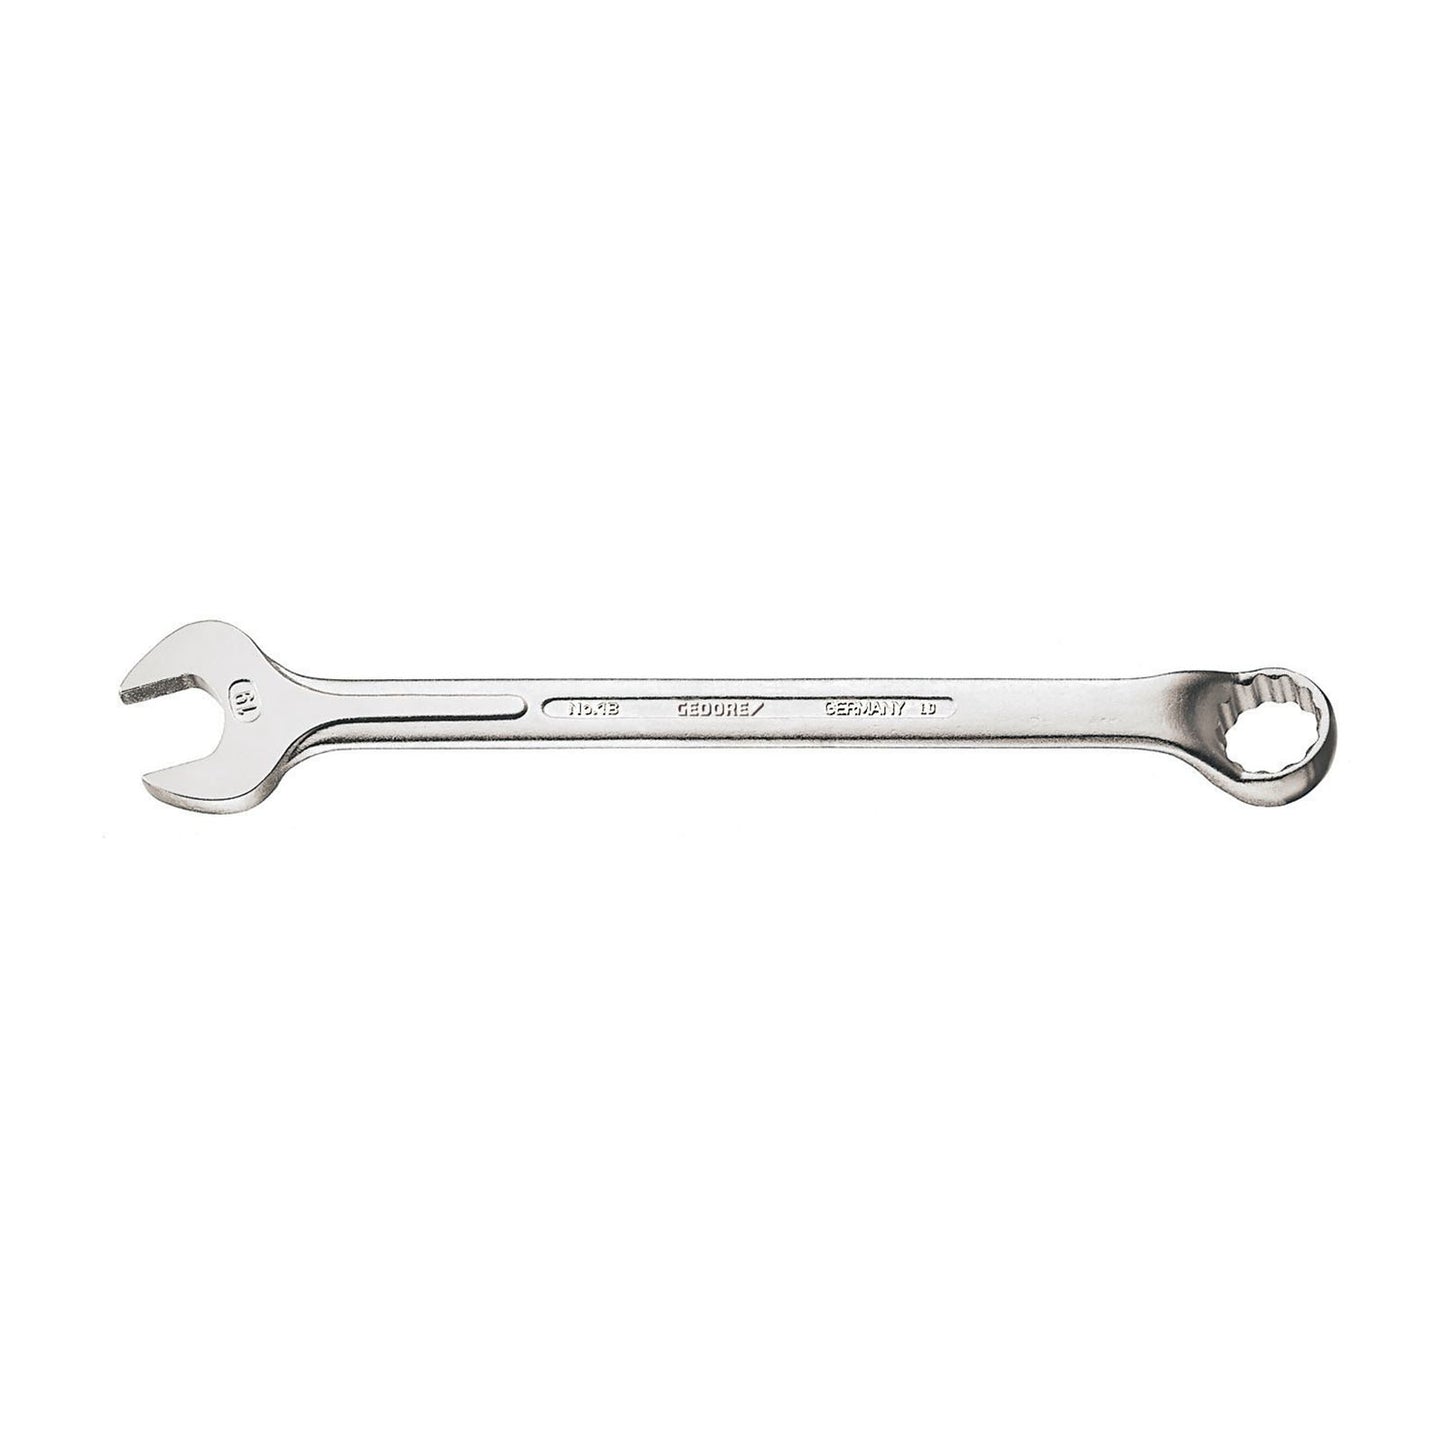 GEDORE 1 B 5/8W - Offset Combination Wrench, 5/8W (6010390)